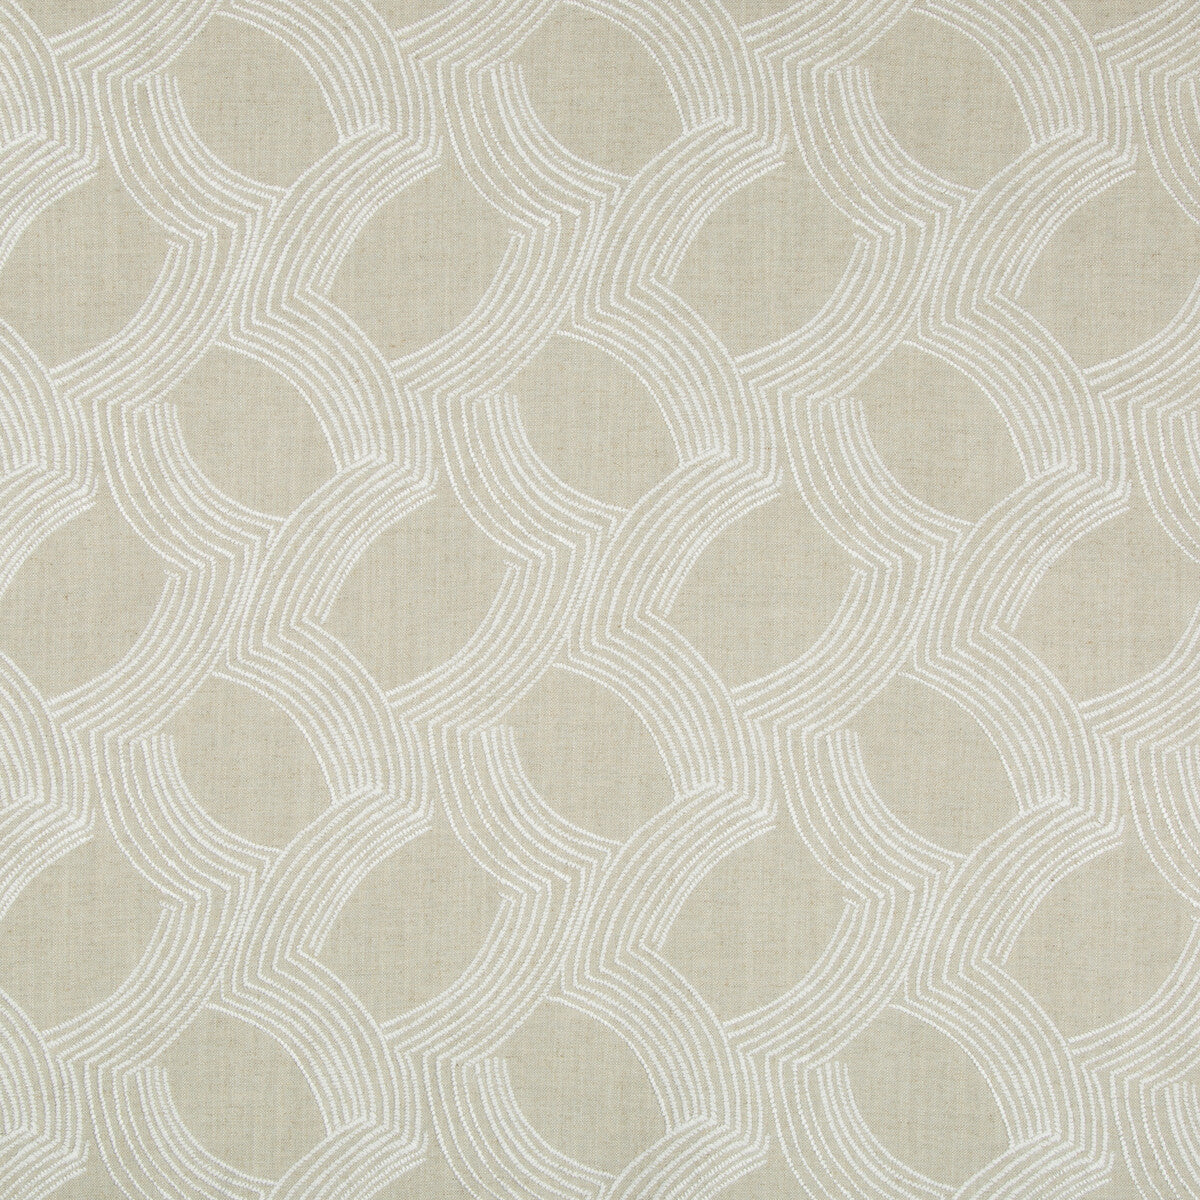 Whyknot fabric in natural color - pattern 34858.16.0 - by Kravet Design in the Thom Filicia Altitude collection